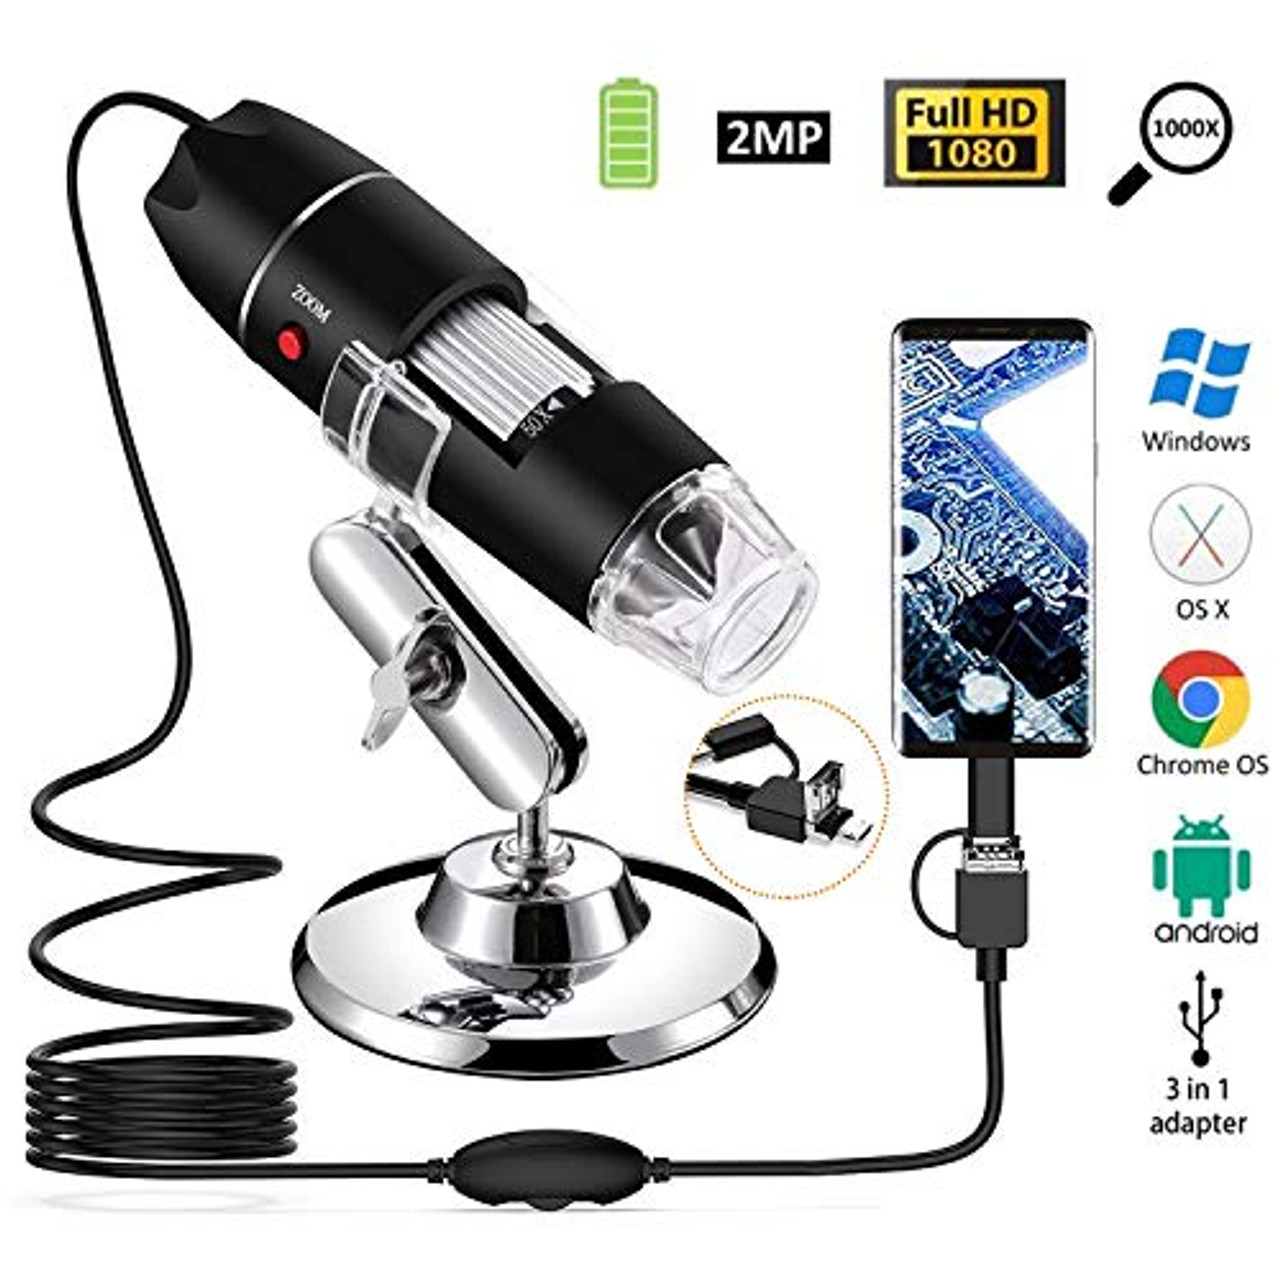 1080P HD 2MP Camera 50x to 1000x Magnification Handheld Endoscope 8 LED Microscope WiFi USB Arm Stand Compatible with iPhone/iPad/Mac/Window/Android/iOS 